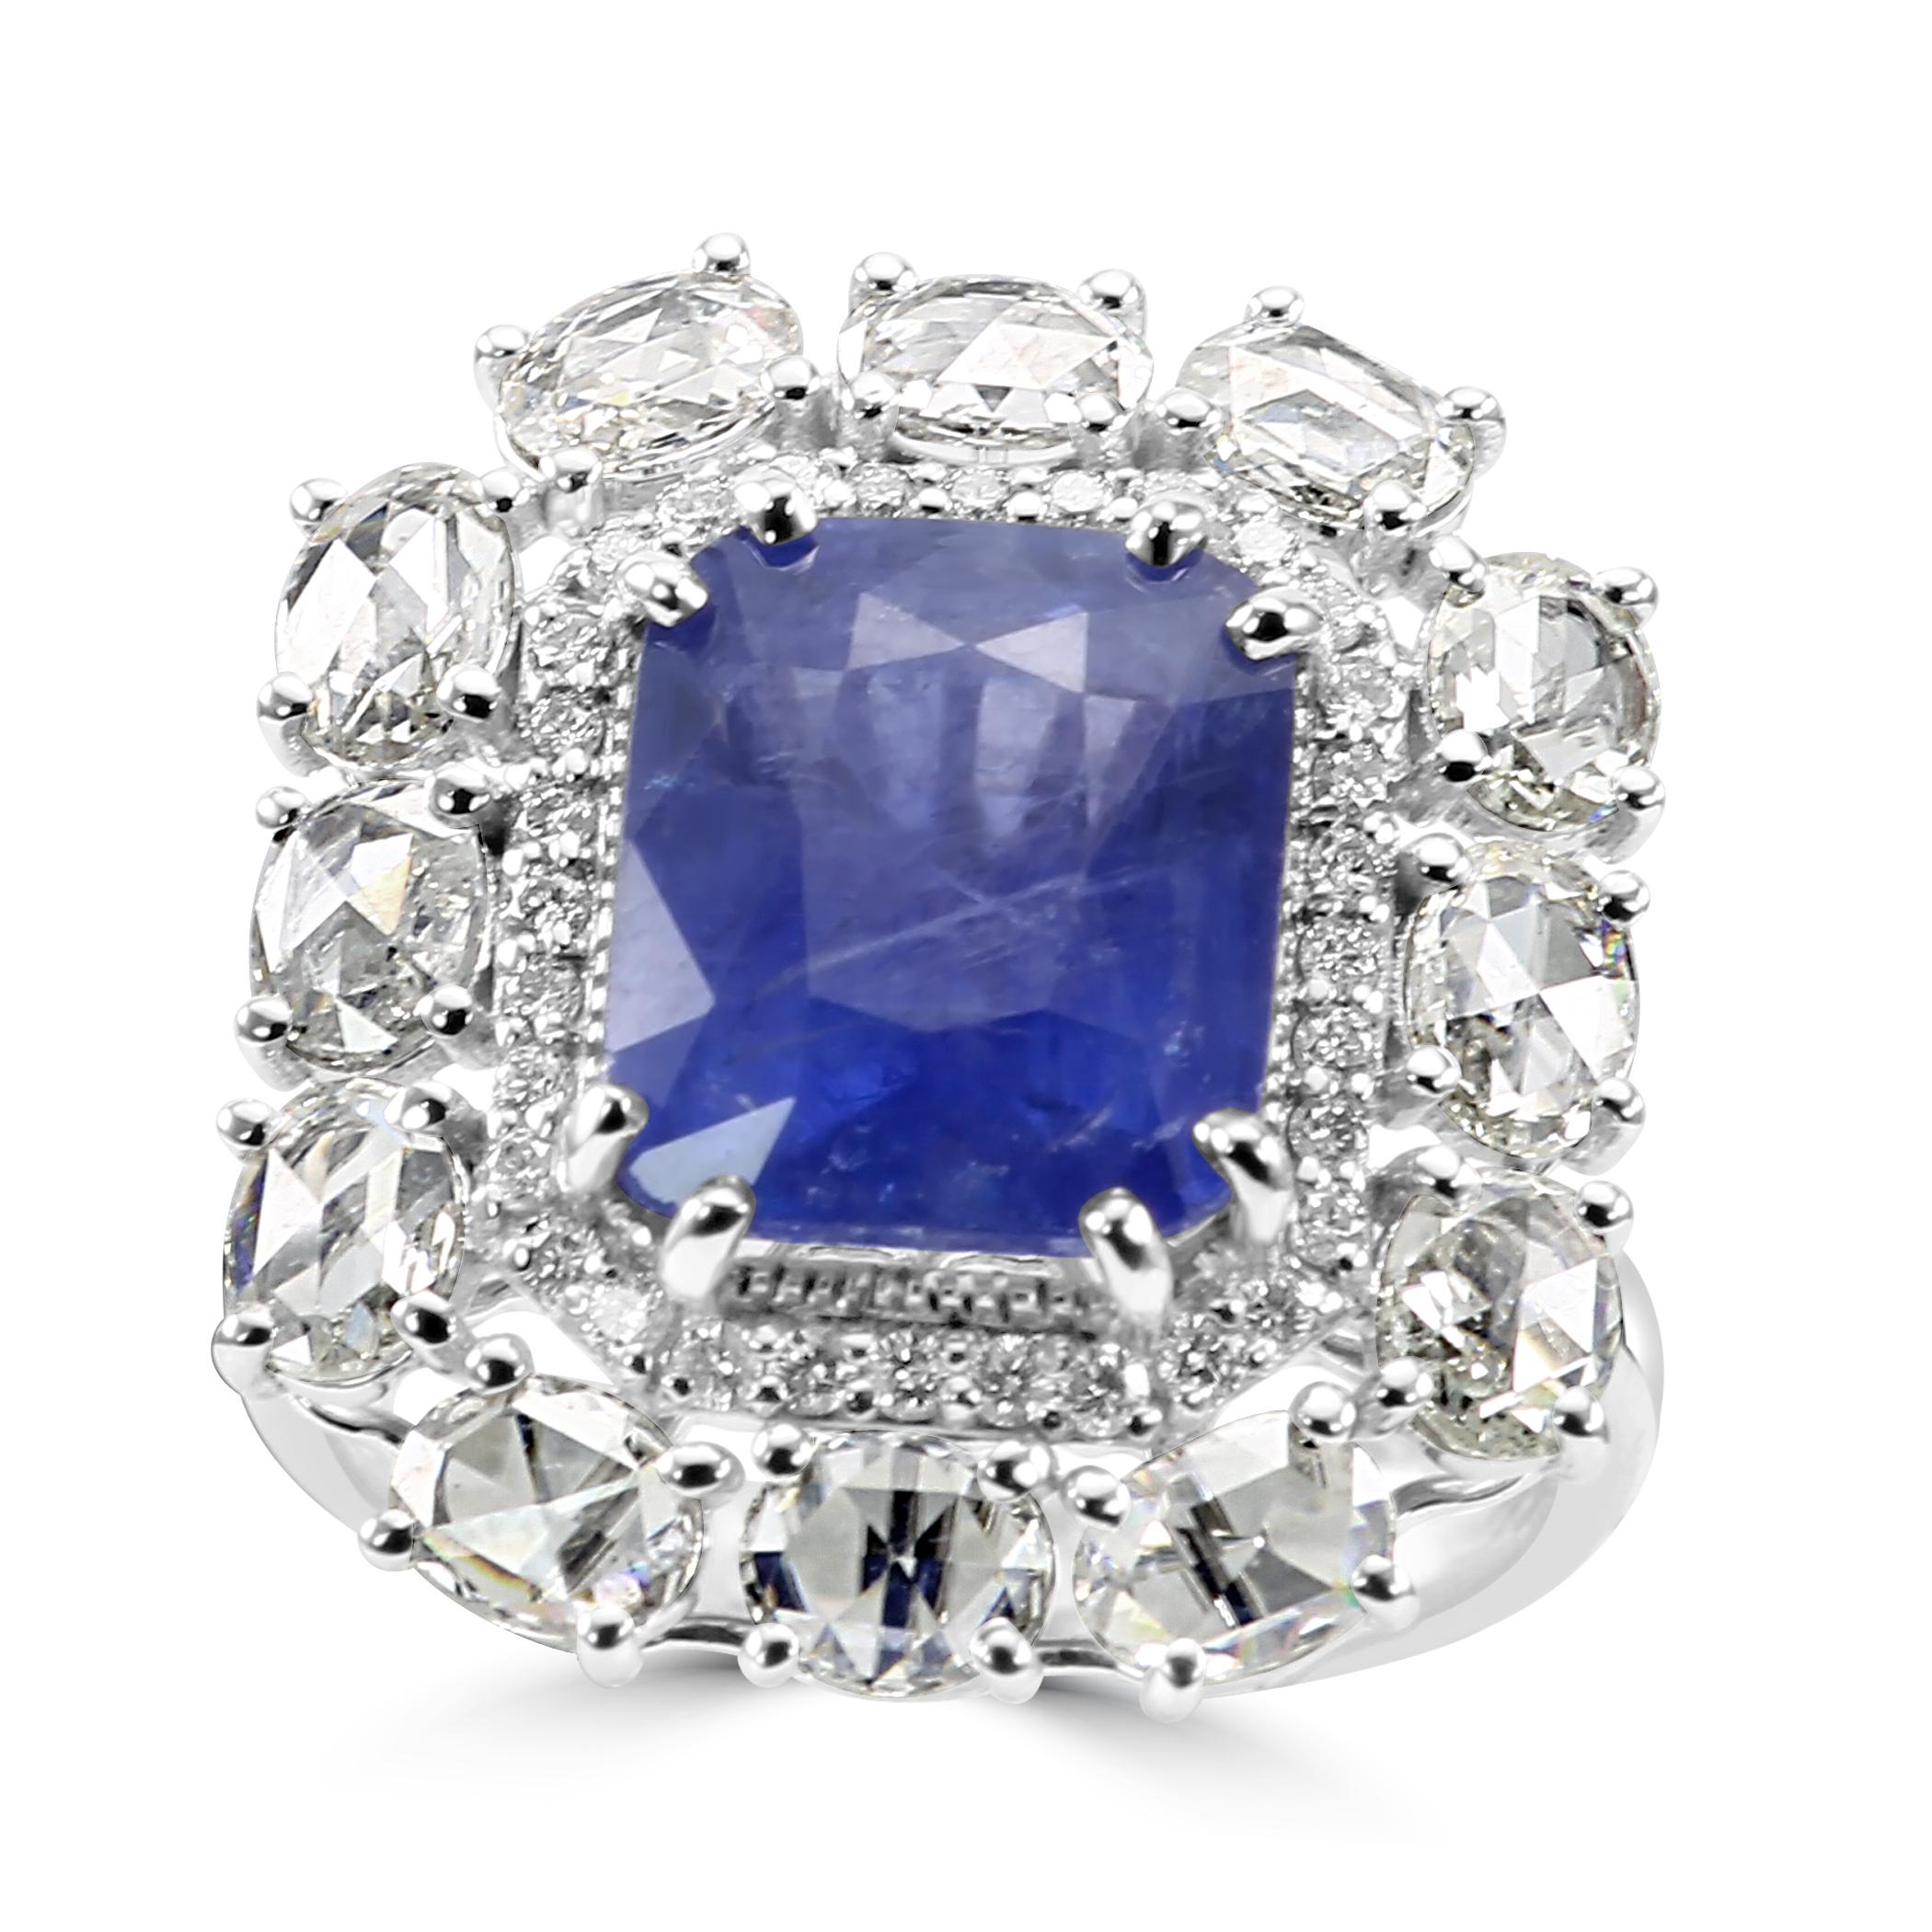 Step into the realm of unparalleled elegance with our stunning Ceylon Sapphire double halo ring. 

At the heart of this majestic ring is the Ceylon Sapphire, known for its enchanting blue hue and cushion-cut shape. Weighing a total of 6.06 carats,